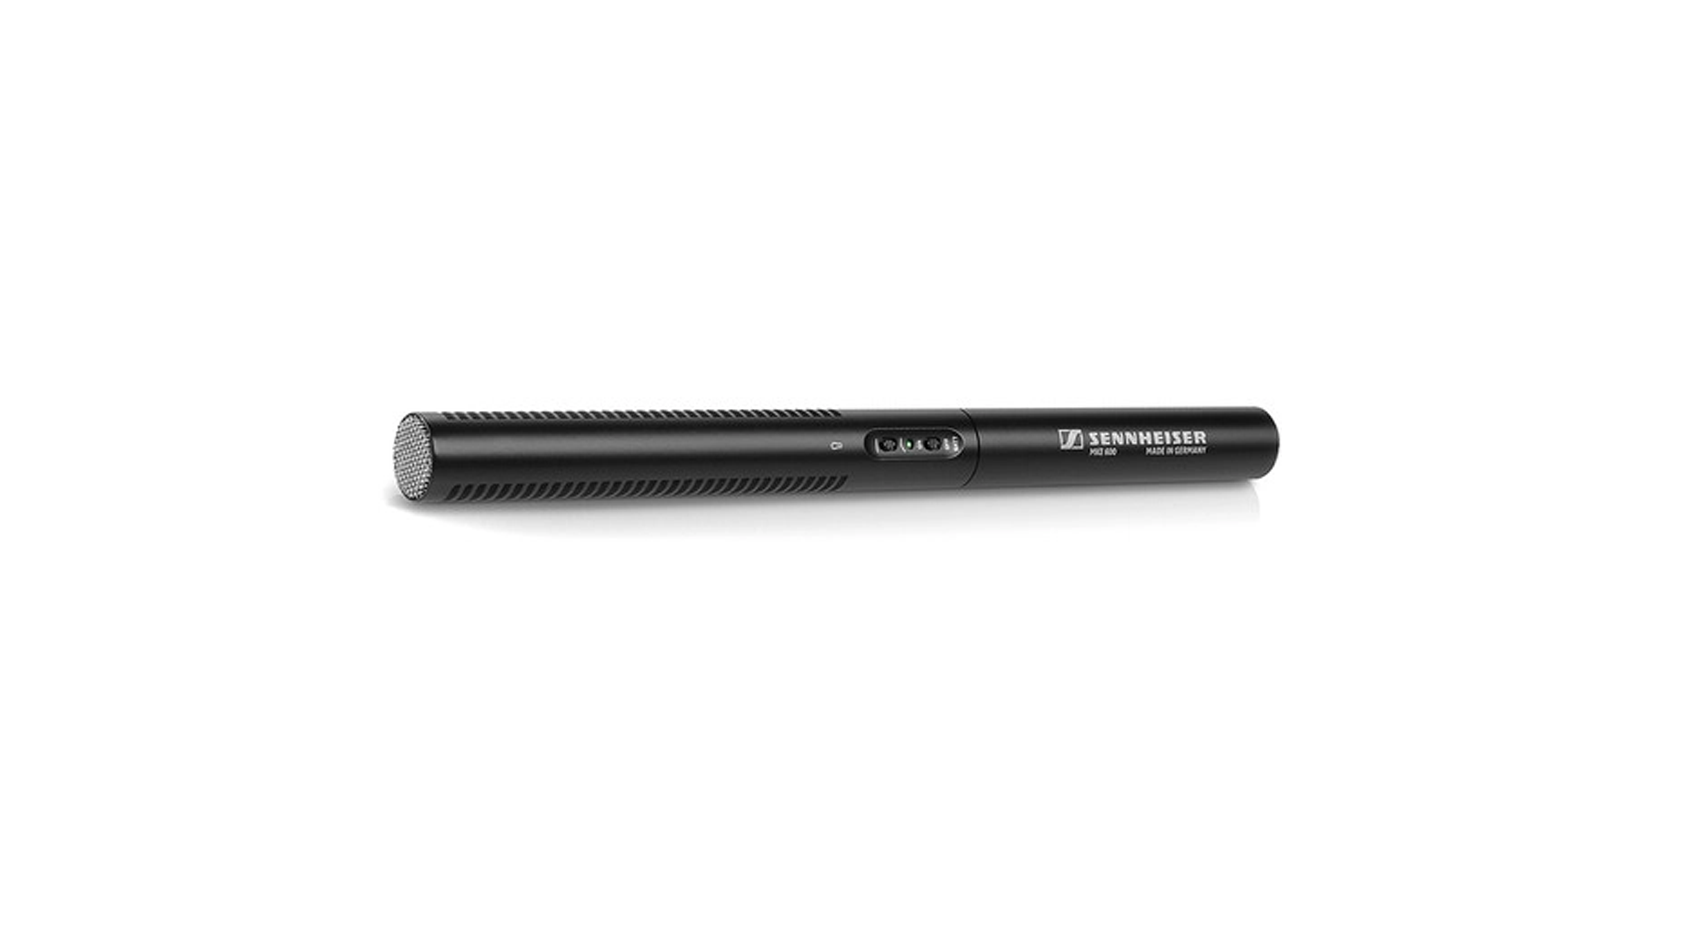 A product image of the Sennheiser MKE 600 shotgun microphone in black against a white background.